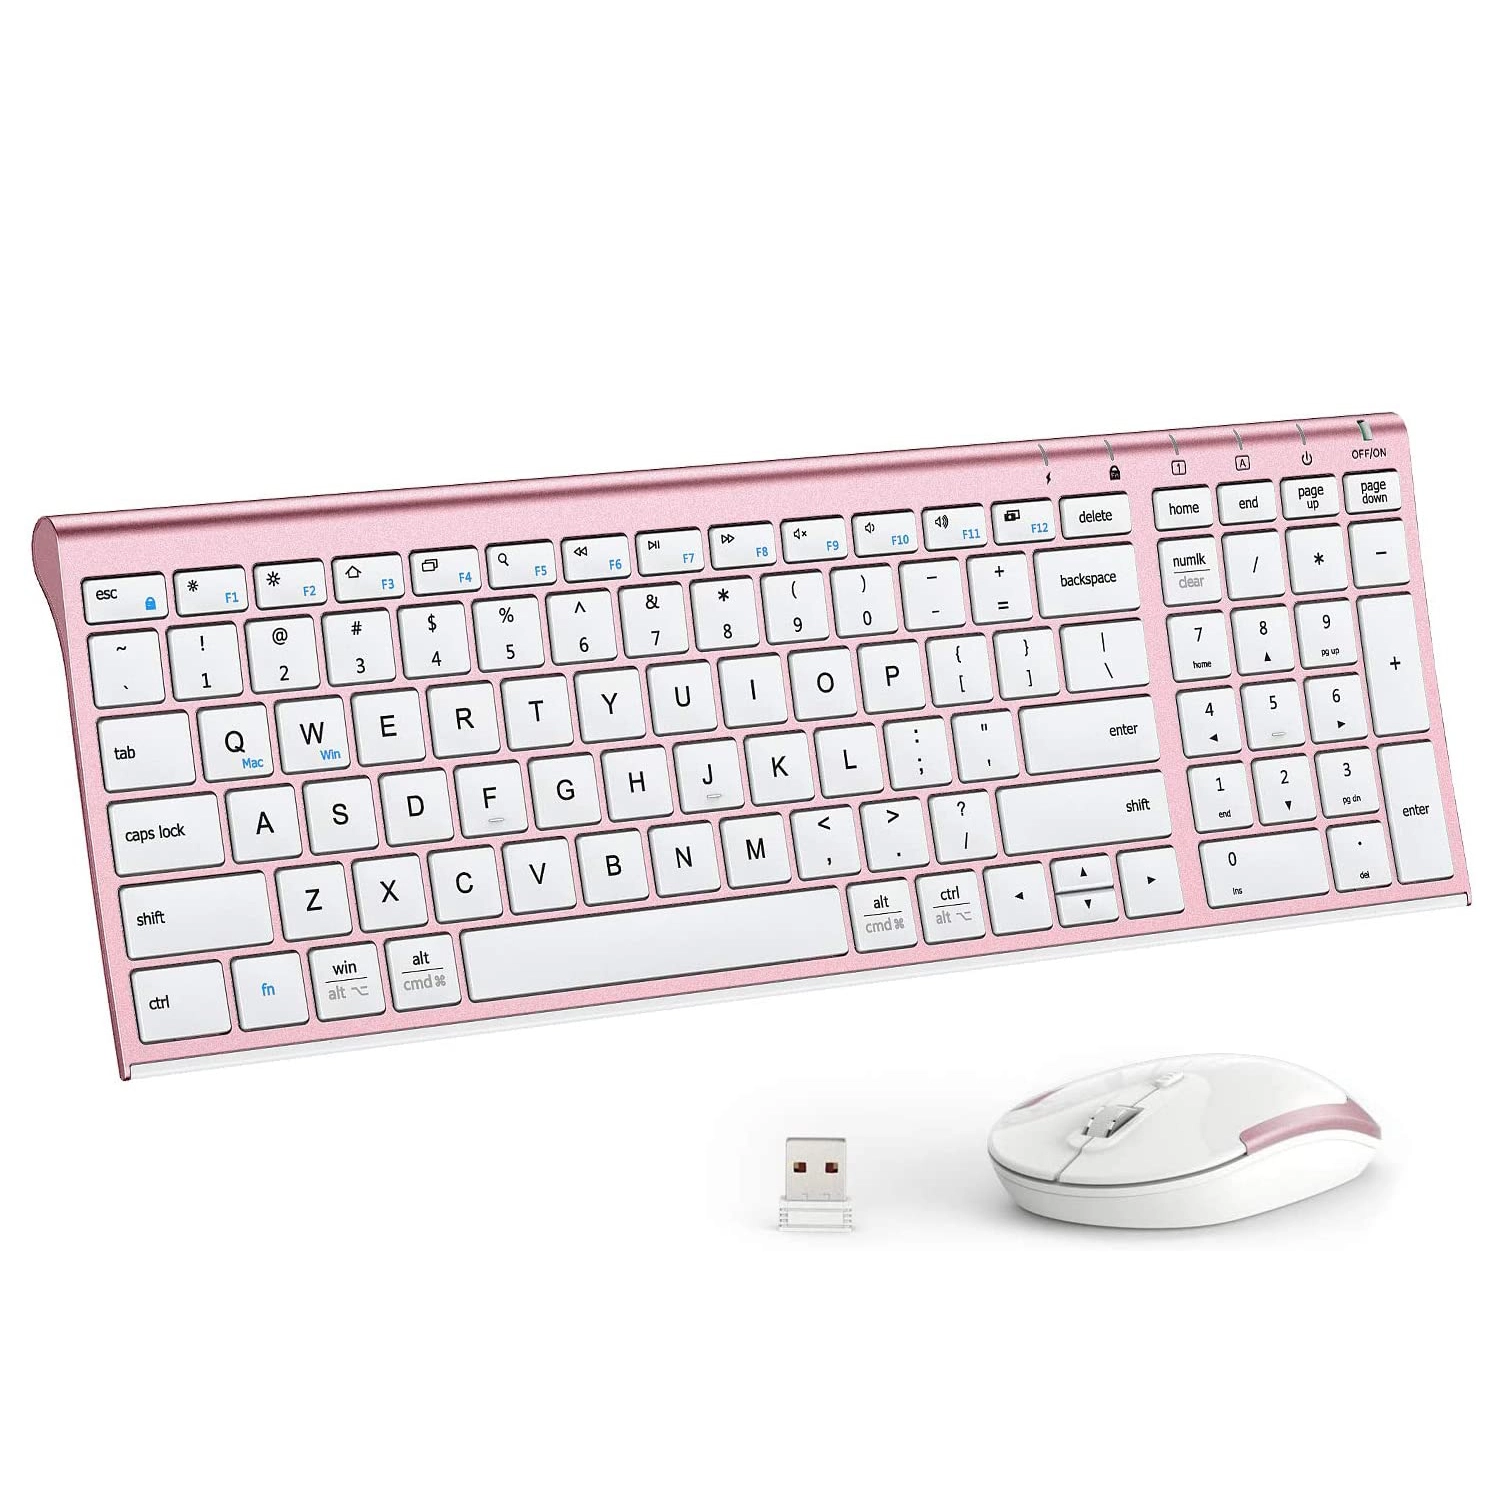 GK03 Wireless Keyboard&Mouse Combo, Rose gold